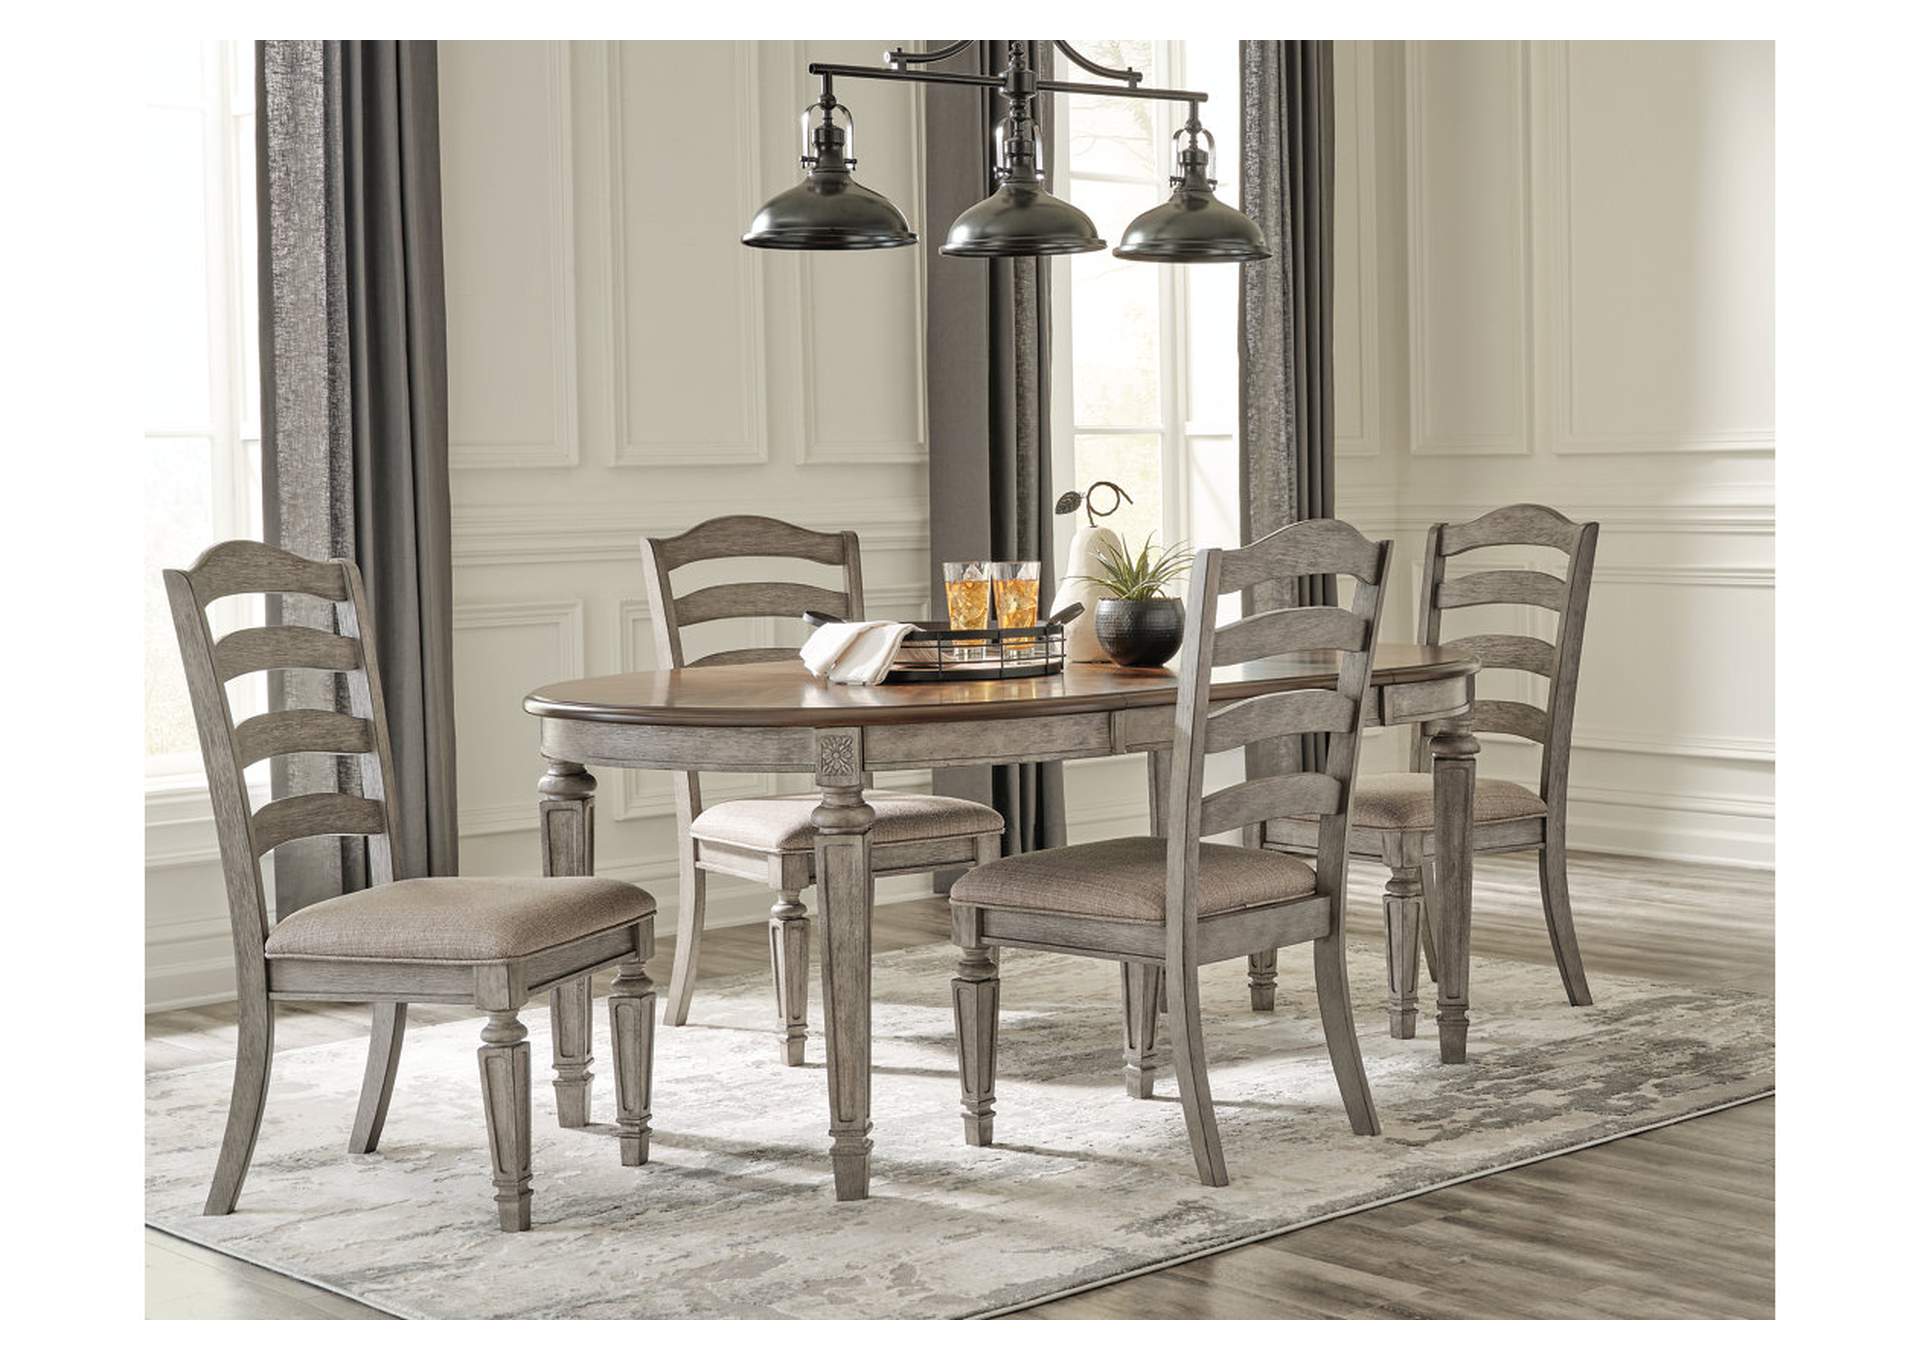 Lodenbay Dining Table and 4 Chairs,Signature Design By Ashley